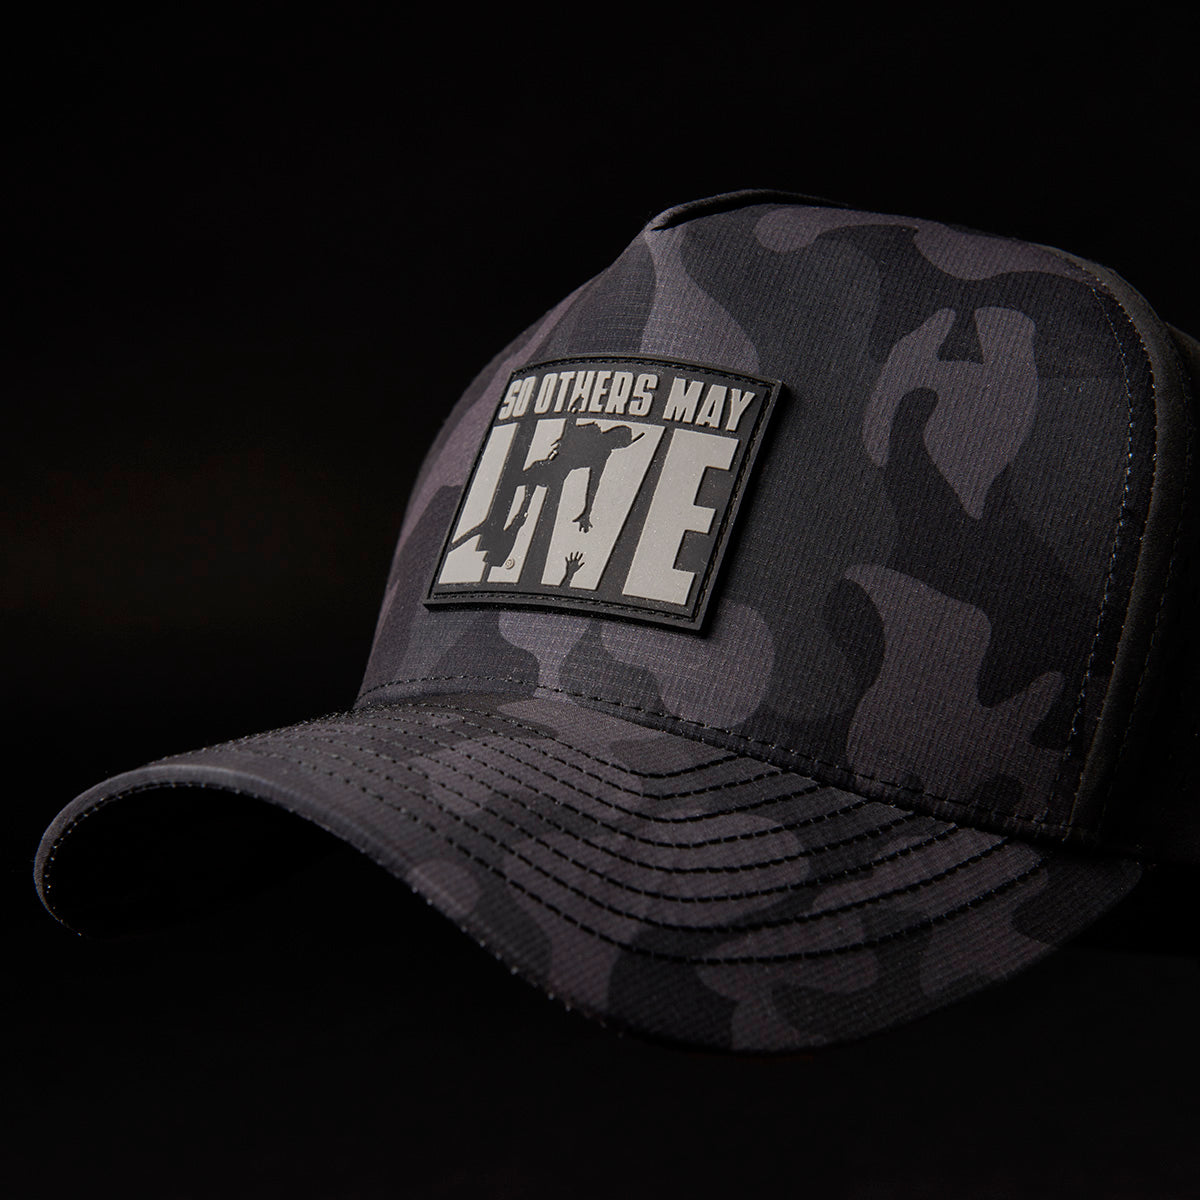 So Others May Live - Black Camo Hat